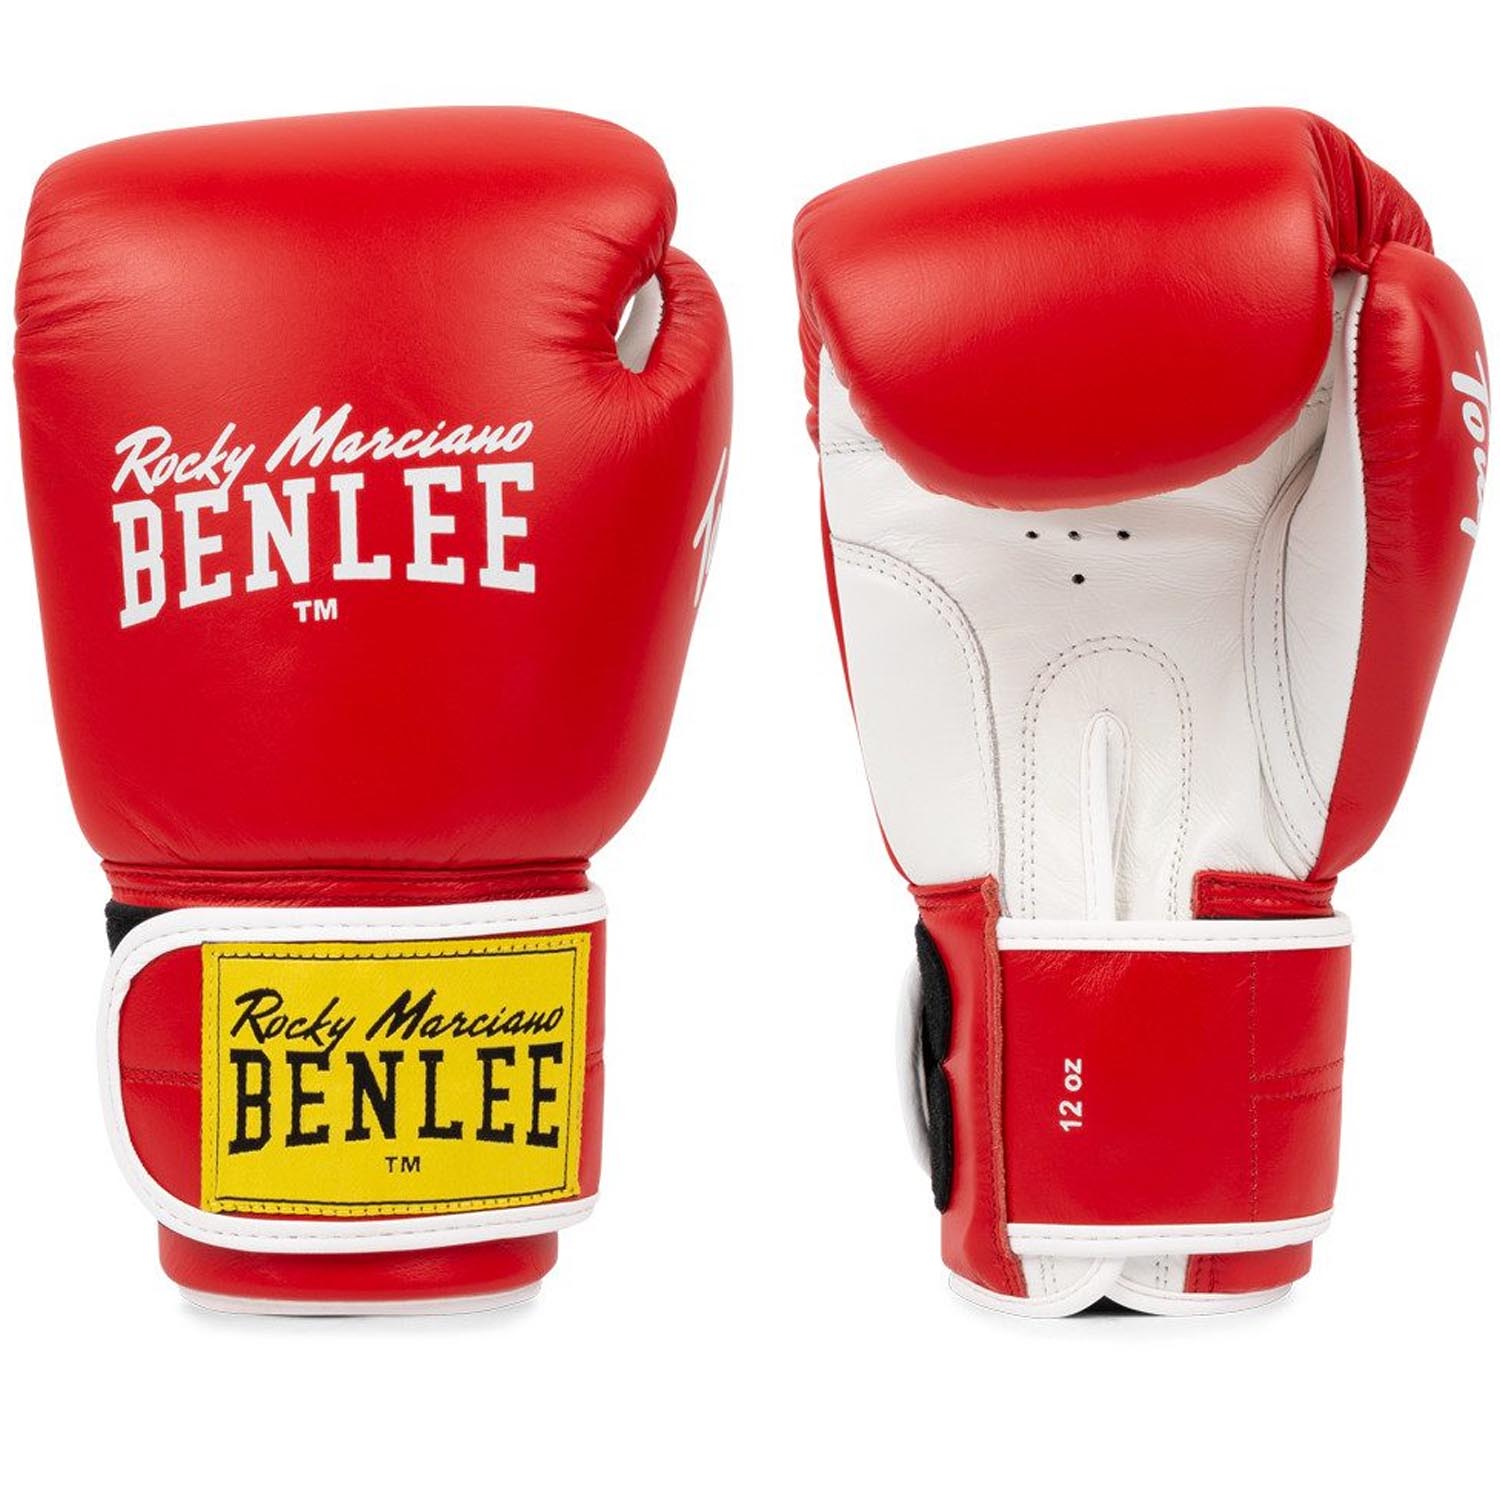 BENLEE Boxing Gloves,Tough, red-white